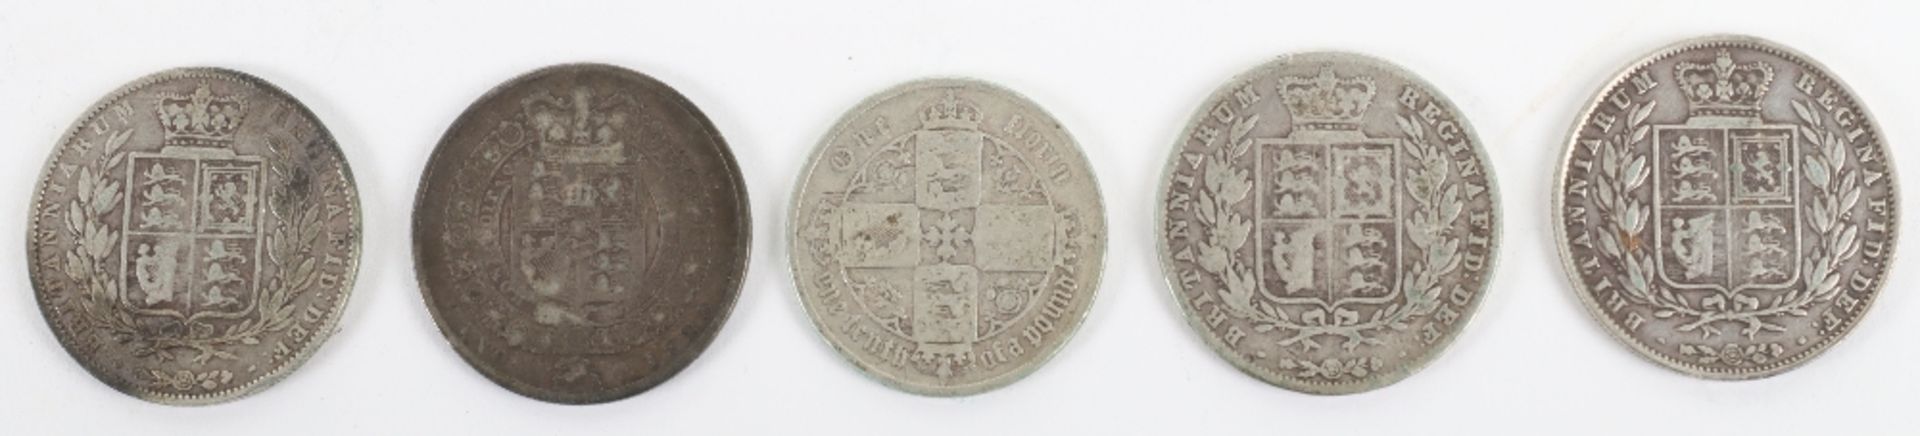 Selection of halfcrowns, 1823, 1846, 1840, 1849 - Image 2 of 2